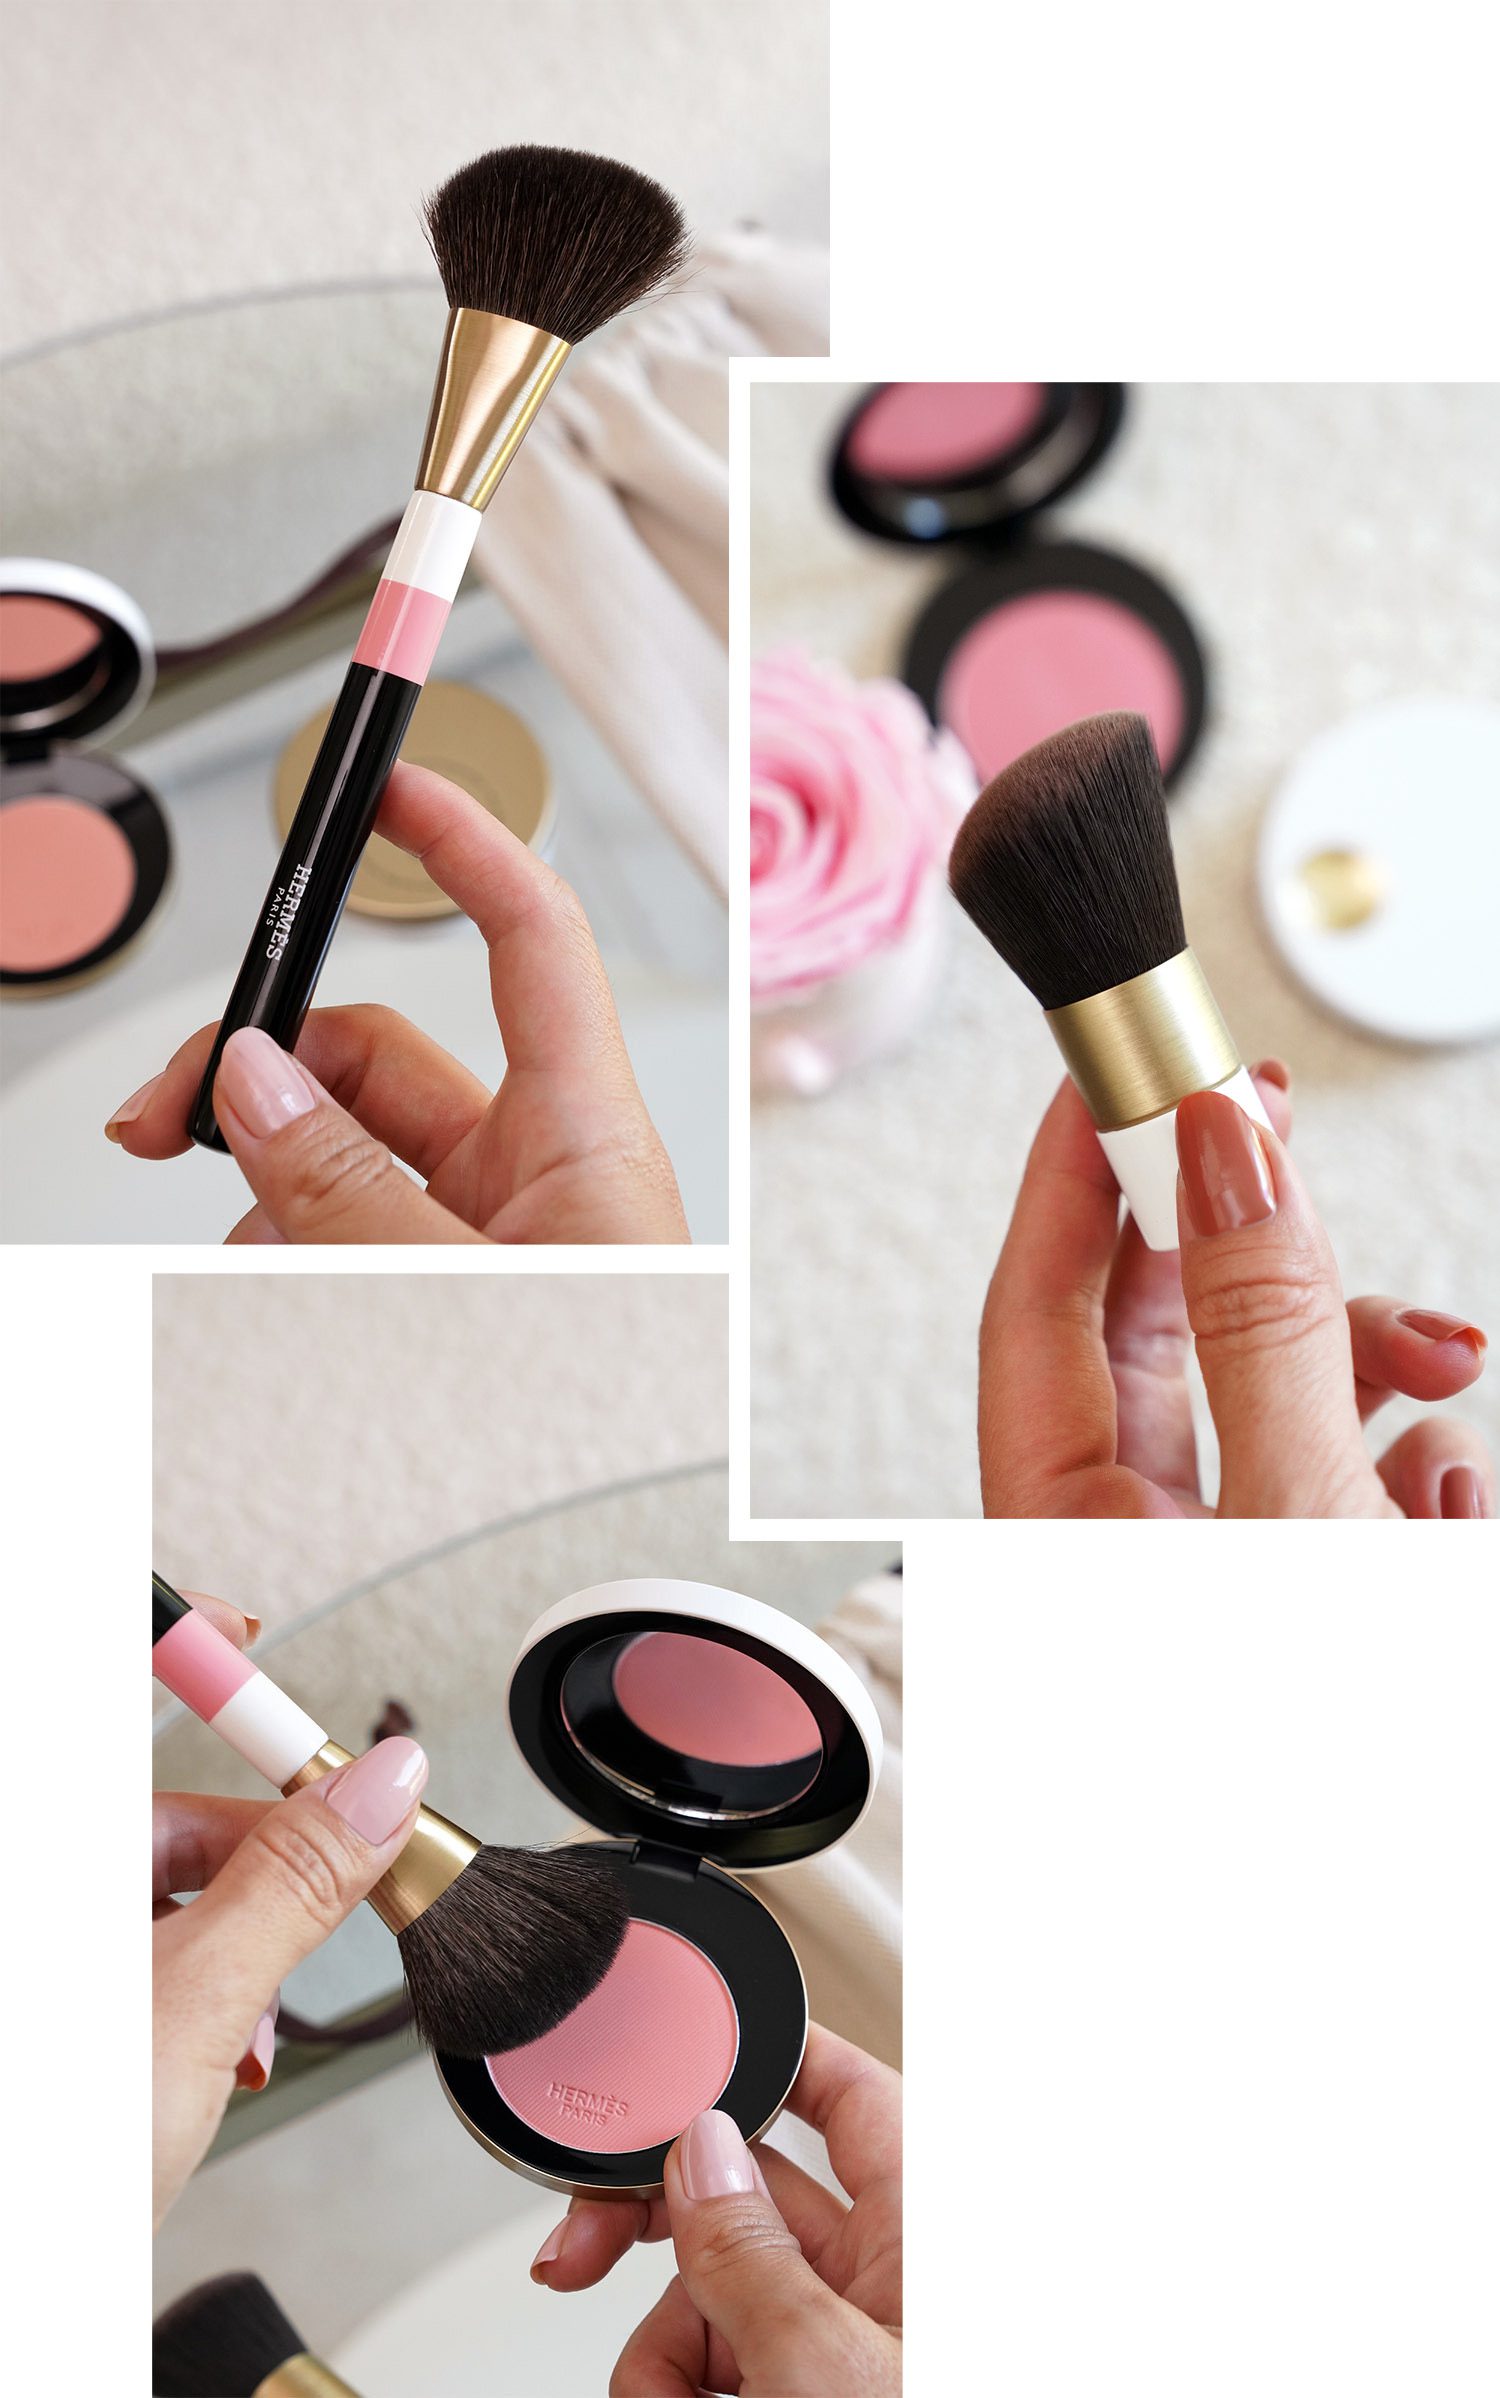 Rose Hermes Silky Blush Powder + Rosy Lip Enhancer Review - The Beauty Look  Book